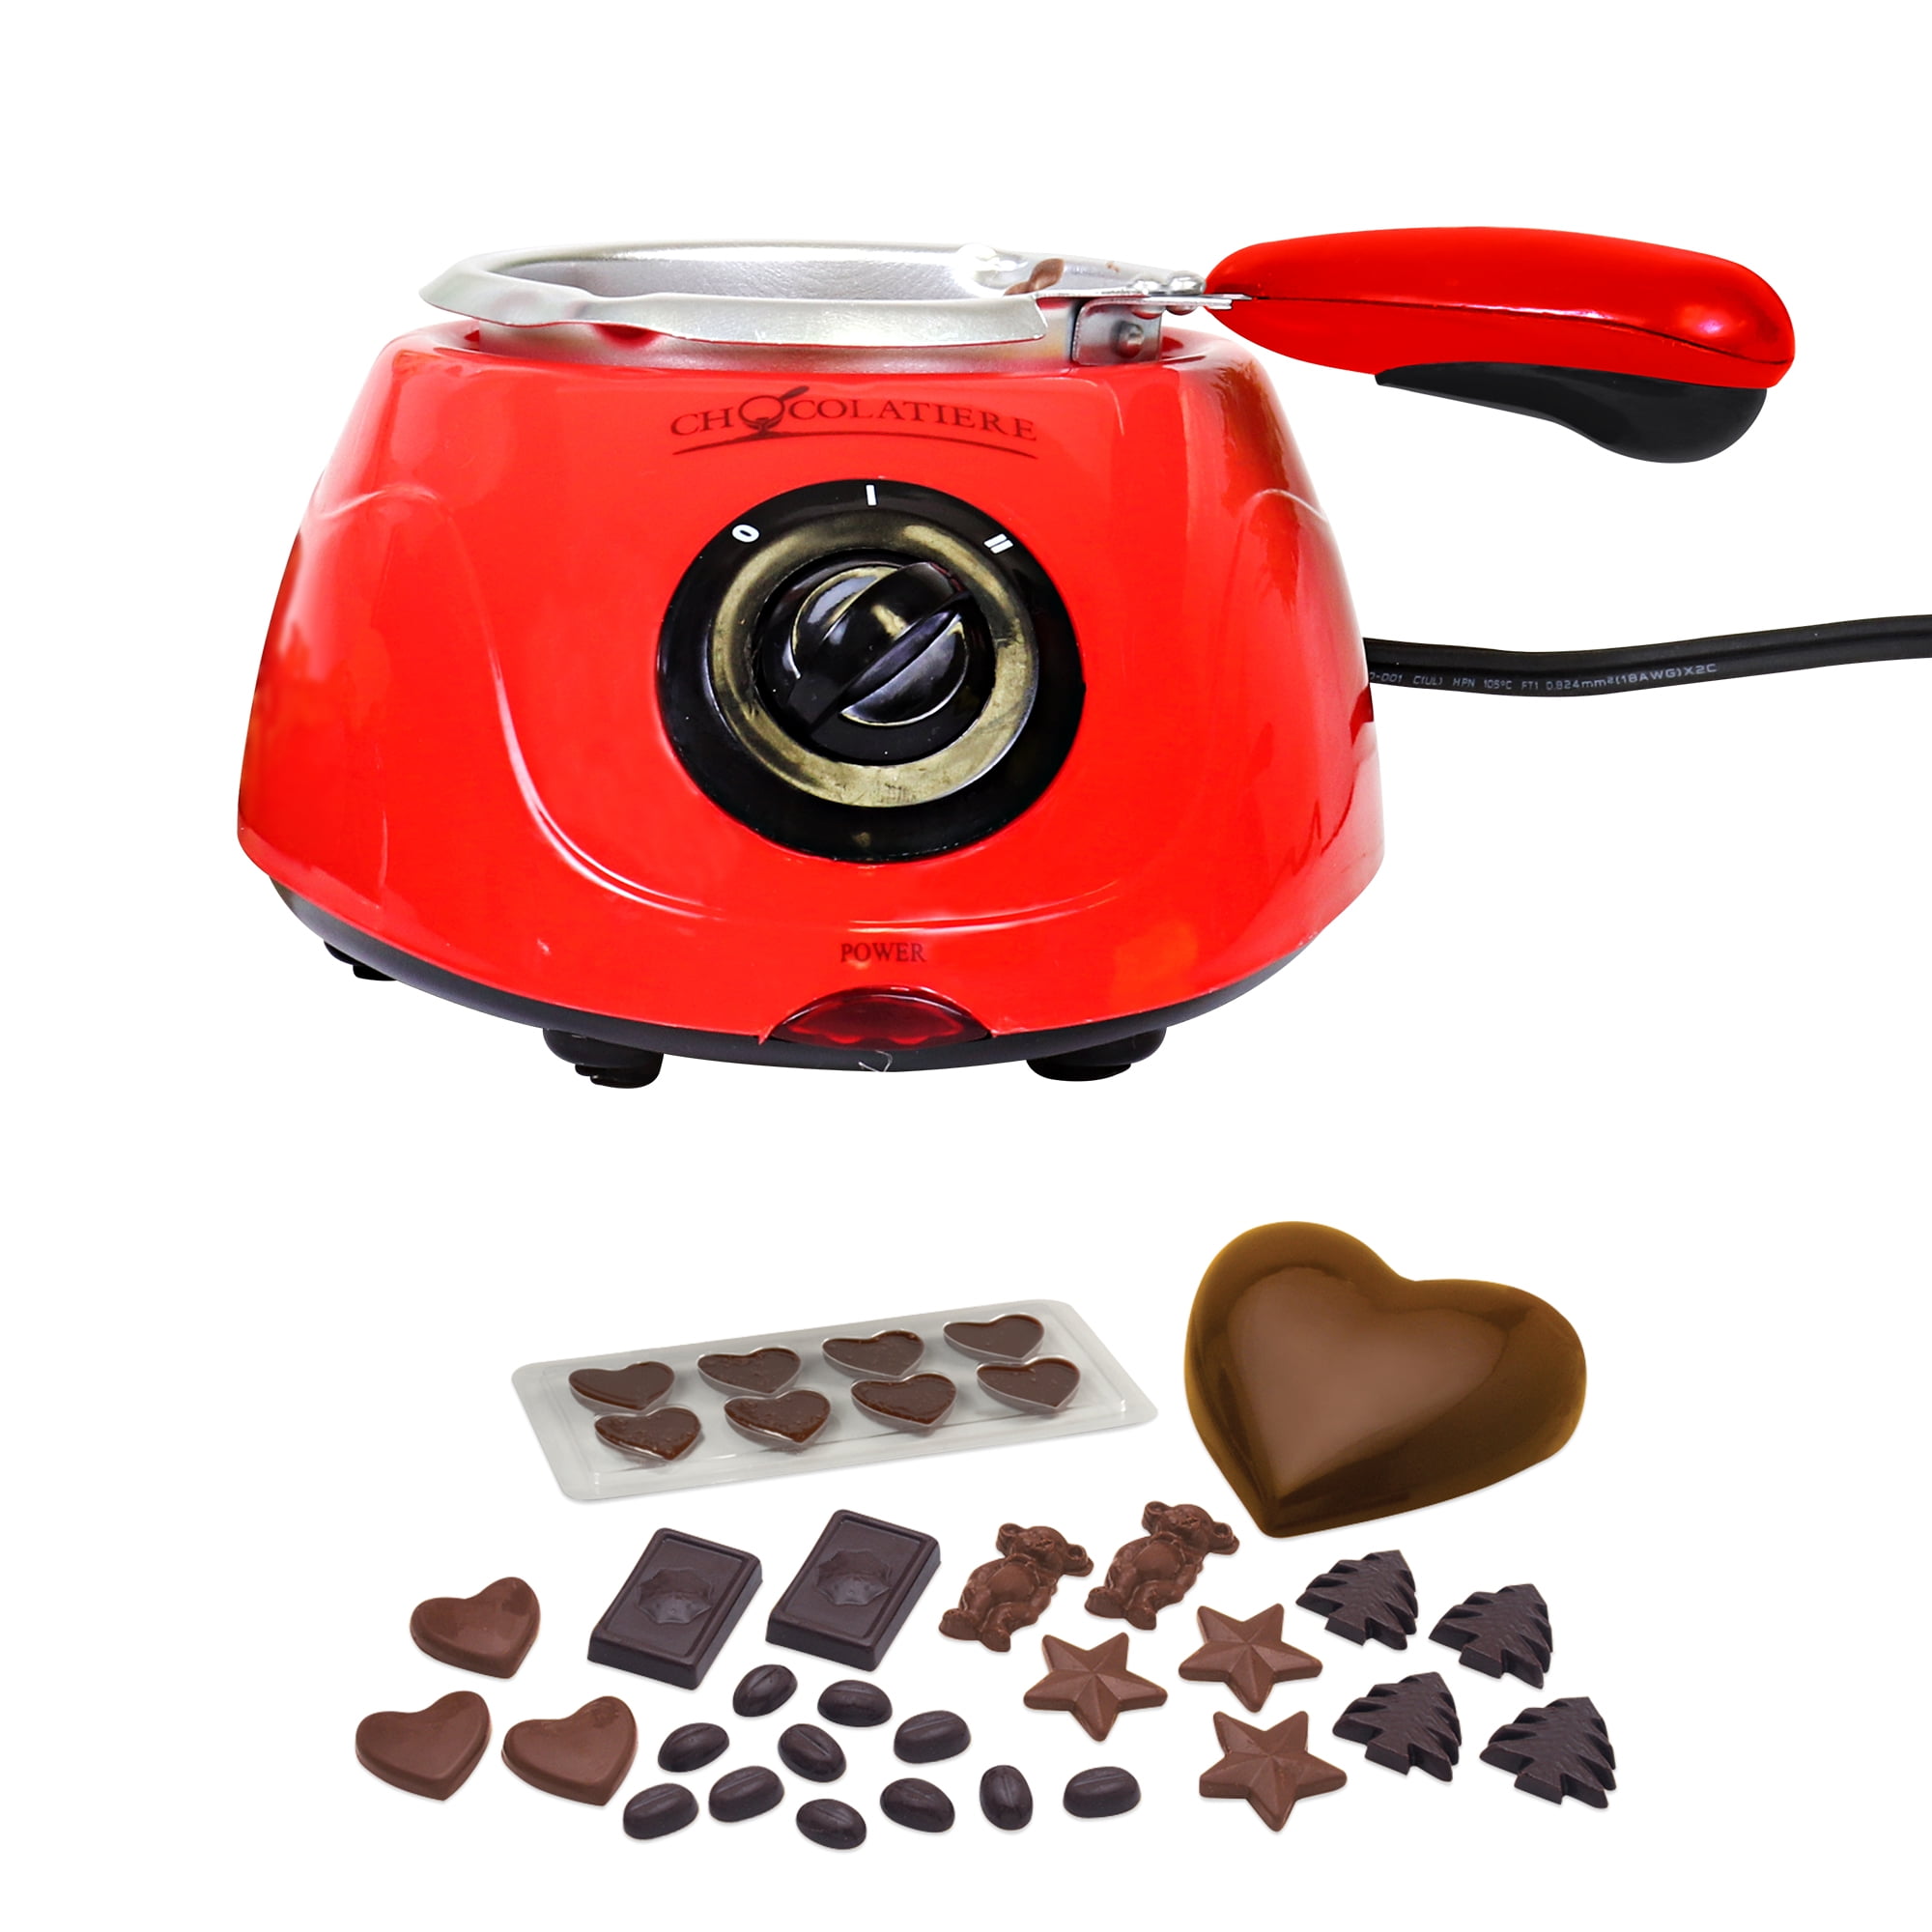 Total Chef Chocolatiere Electric Chocolate Fondue / Melting Pot and Candy  Making Kit, 8.8 oz (250 g) Capacity, with 32-Piece Accessory Kit for 